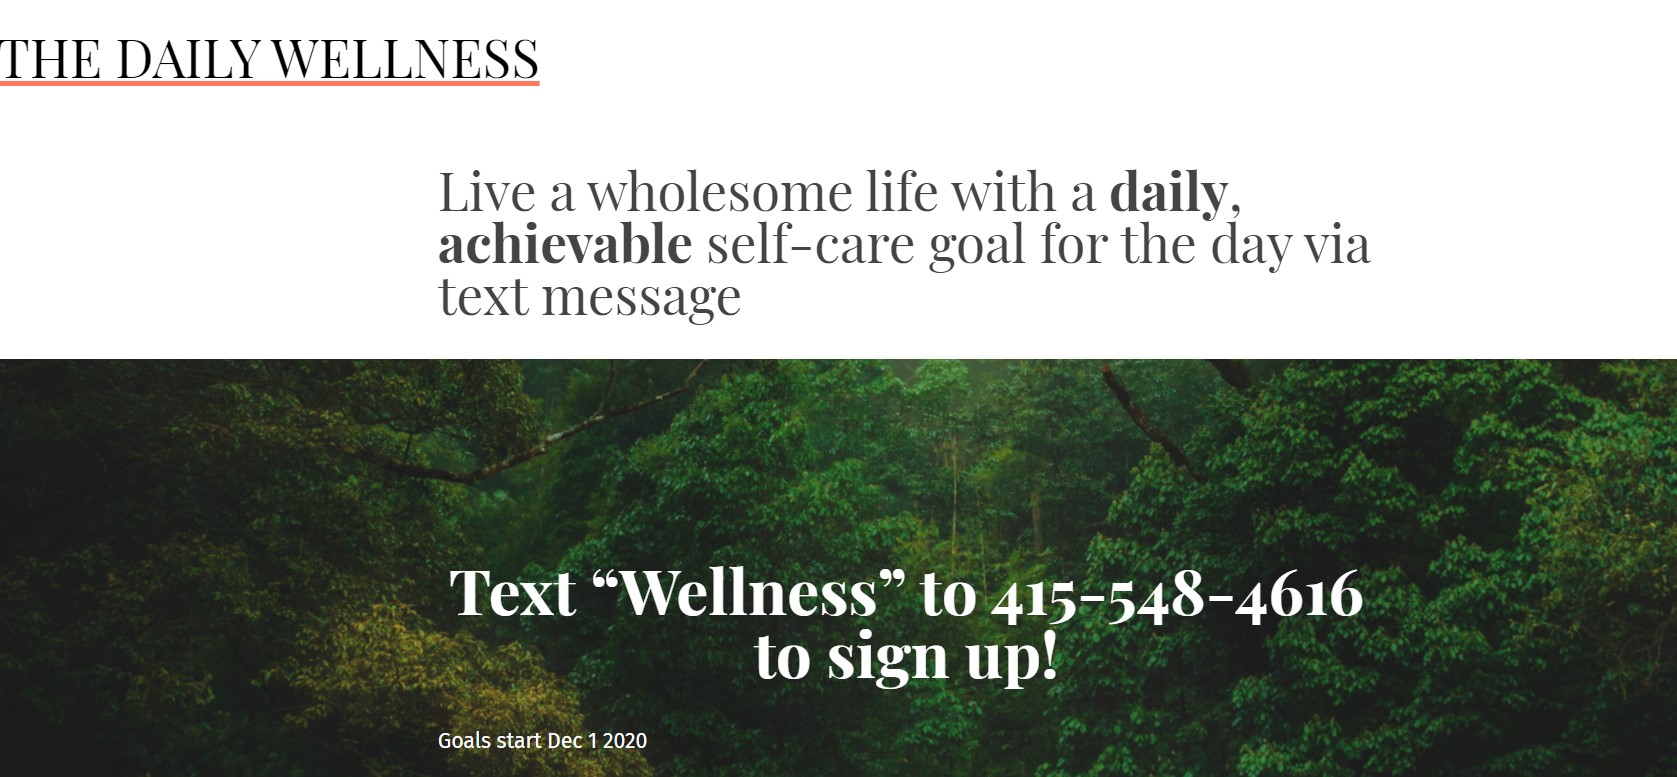 Get feedback from a vast remote working audience about The Daily Wellness